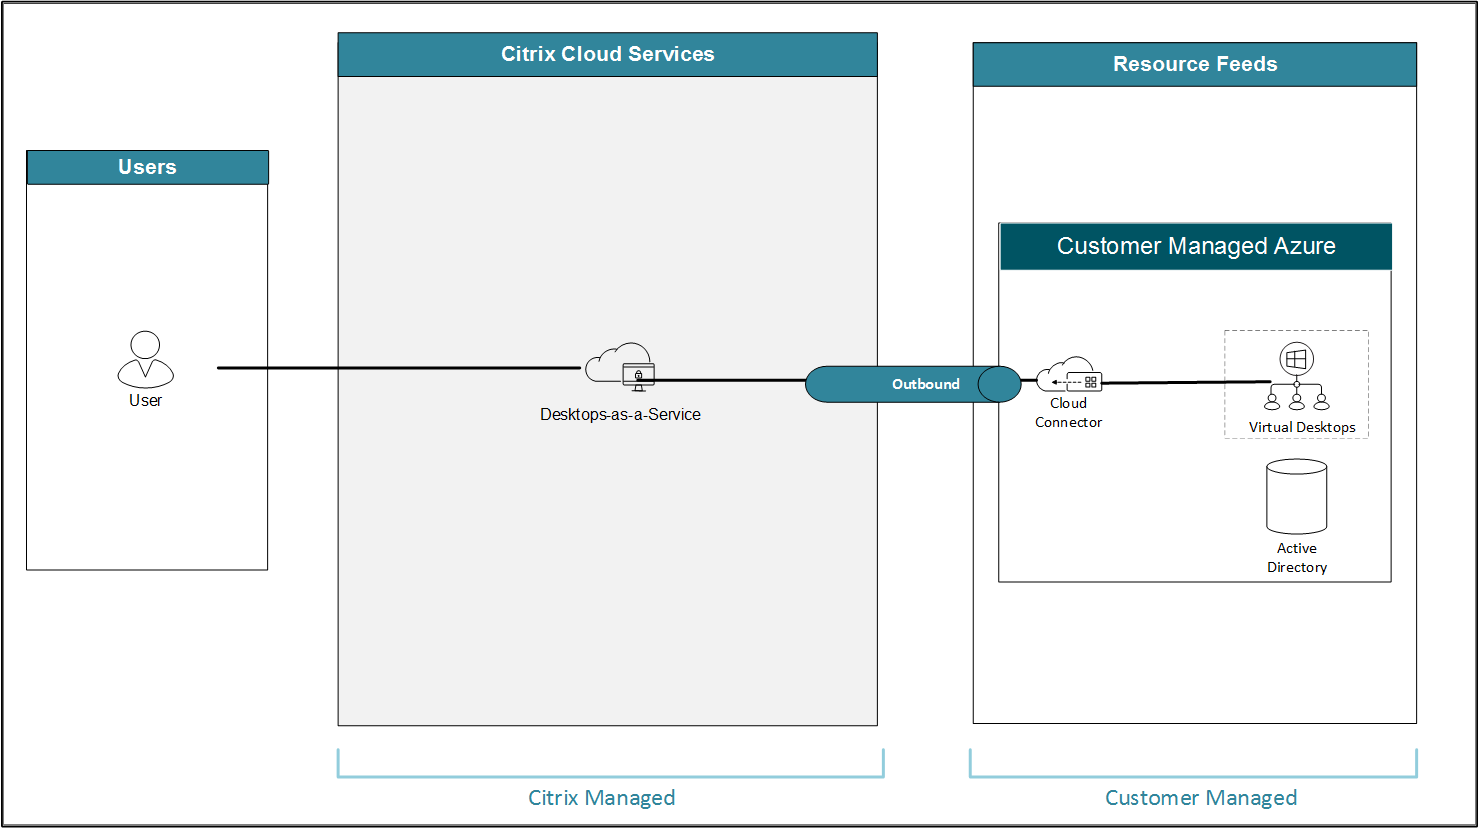 Citrix DaaS for Azure Architecture